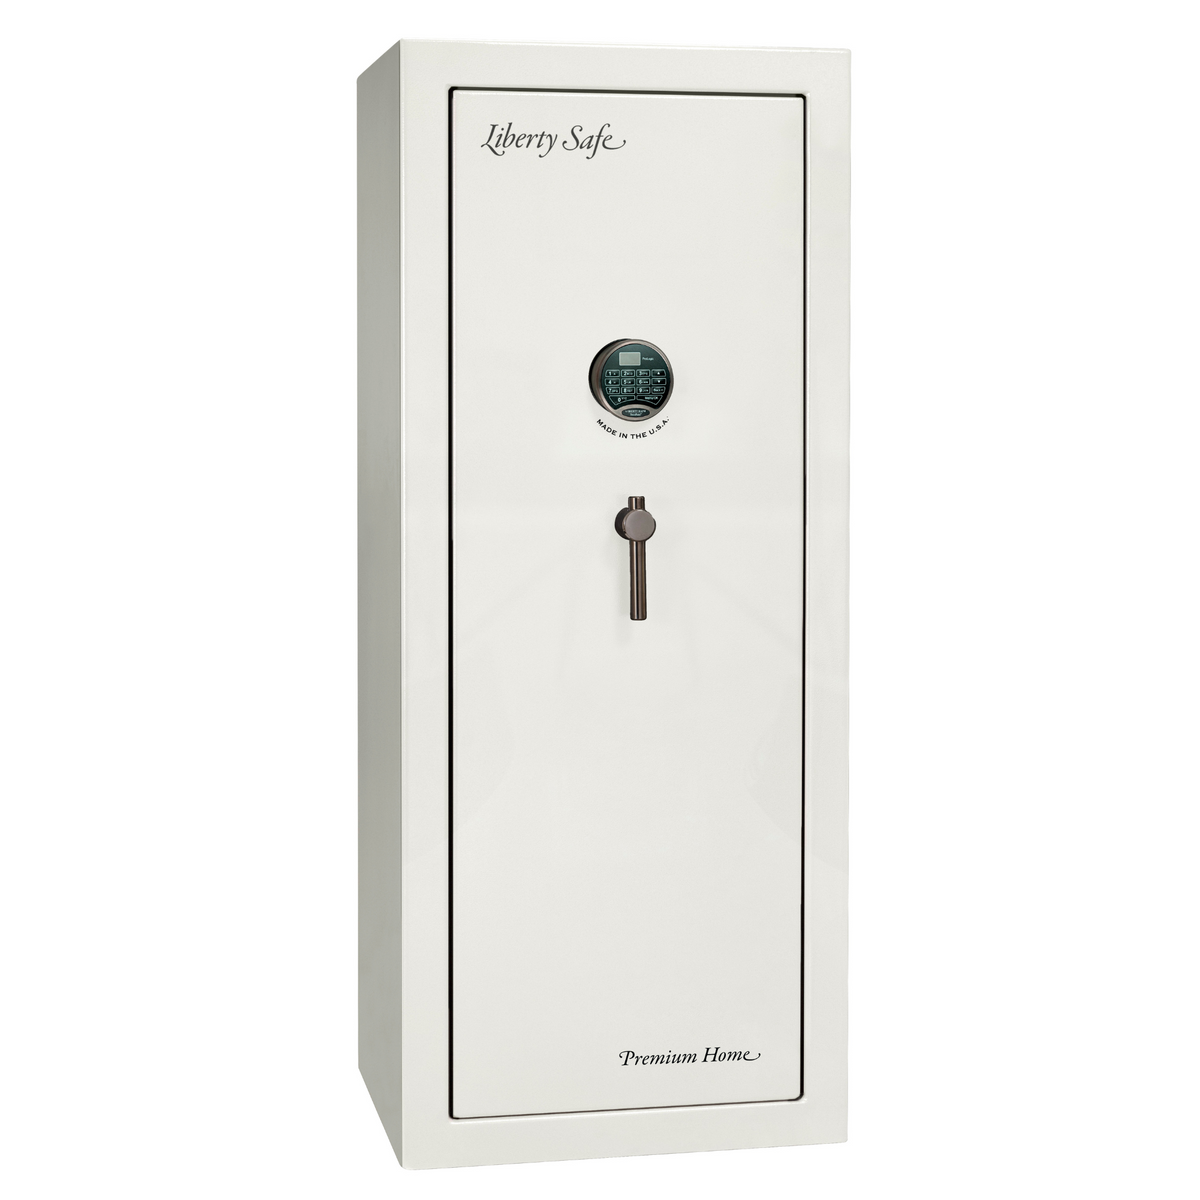 Premium Home Series | Level 7 Security | 2 Hour Fire Protection | 17 | Dimensions: 59.25&quot;(H) x 24&quot;(W) x 20.25&quot;(D) | White Marble - Closed Door